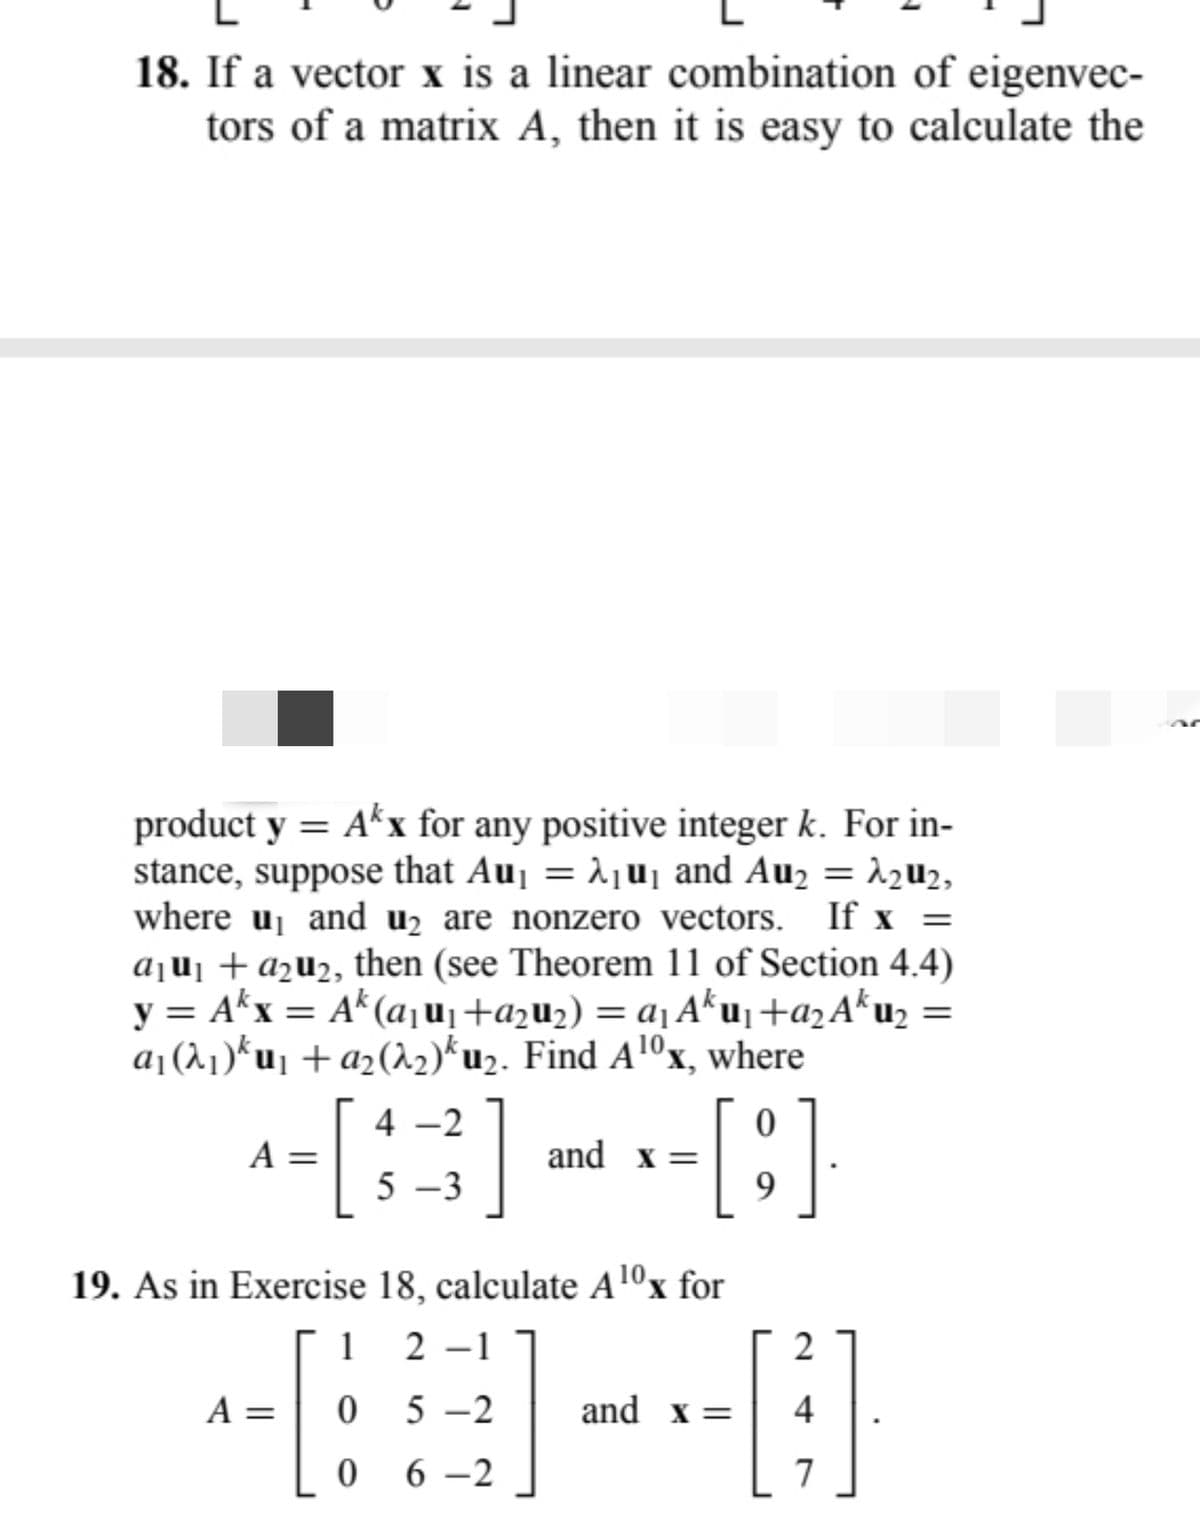 18. If a vector x is a linear combination of eigenvec-
tors of a matrix A, then it is easy to calculate the
product y = Akx for any positive integer k. For in-
stance, suppose that Au₁ = λ₁u₁ and Au₂ = λ₂u₂,
where u₁ and u₂ are nonzero vectors. If x =
a₁u₁ + a₂u₂, then (see Theorem 11 of Section 4.4)
y = Akx = Ak (a₁µ₁ +a₂µ₂) = a₁ Aku₁ +9₂ Aku₂
α₁ (λ₁)*µ₁ + a₂(λ₂)ku₂. Find A¹0x, where
A =
4-2
A =
5-3
]
and x =
[;]
19. As in Exercise 18, calculate A¹0x for
1 2 -1
05-2
06-2
and x =
2
4
7